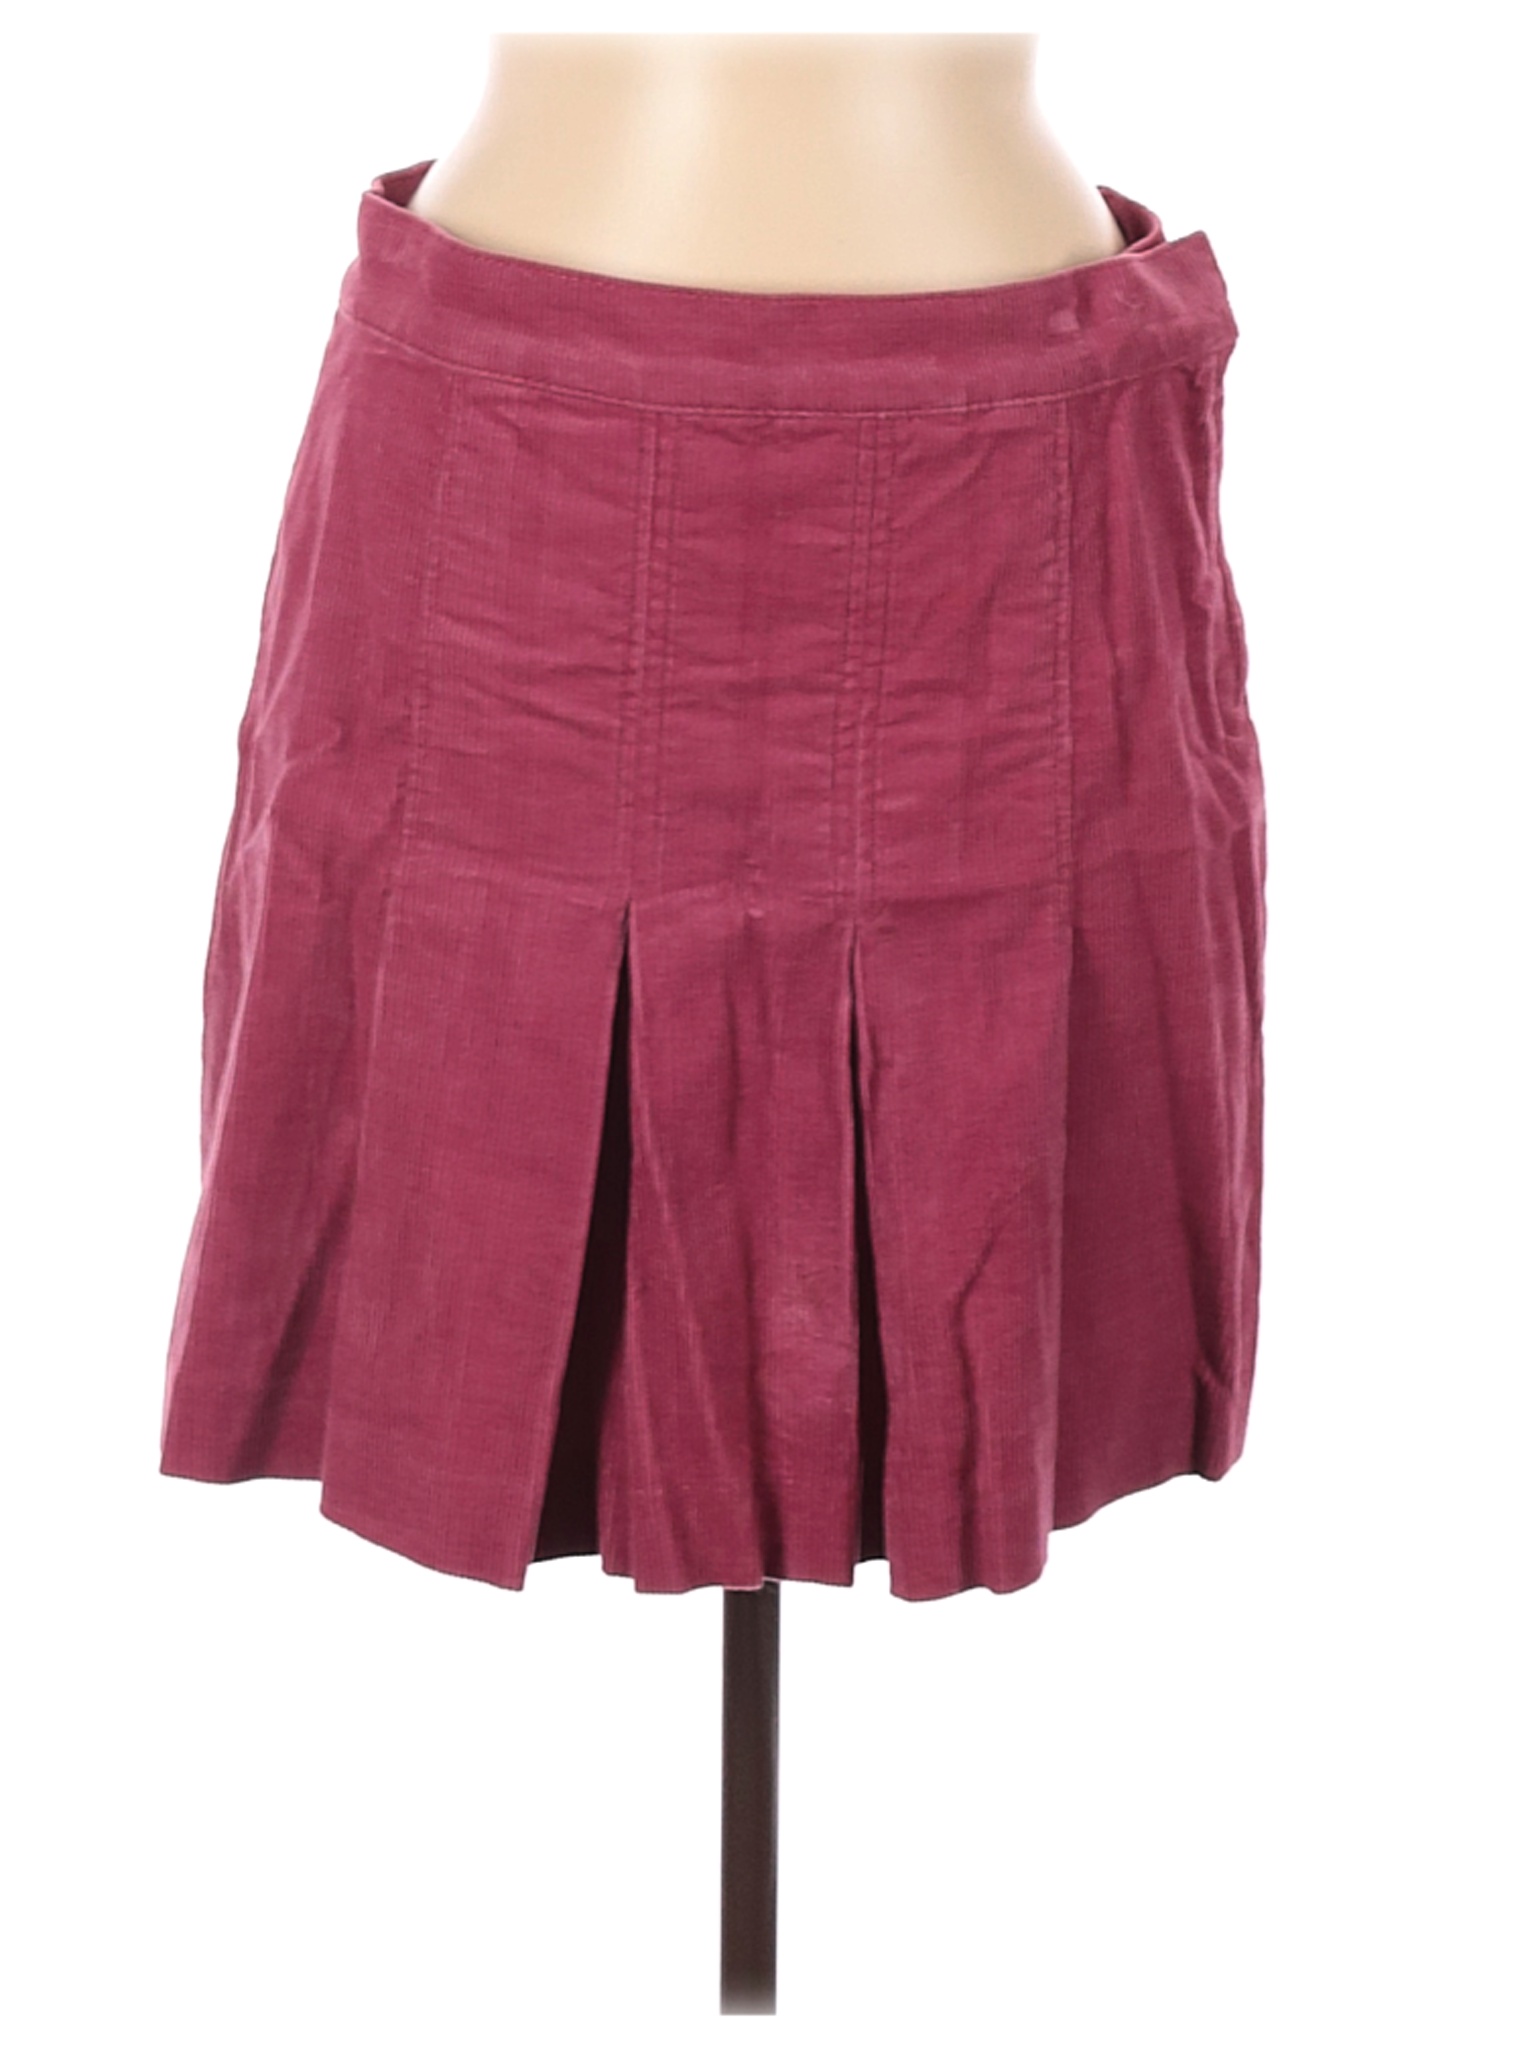 Juicy Couture Women Pink Casual Skirt M | eBay